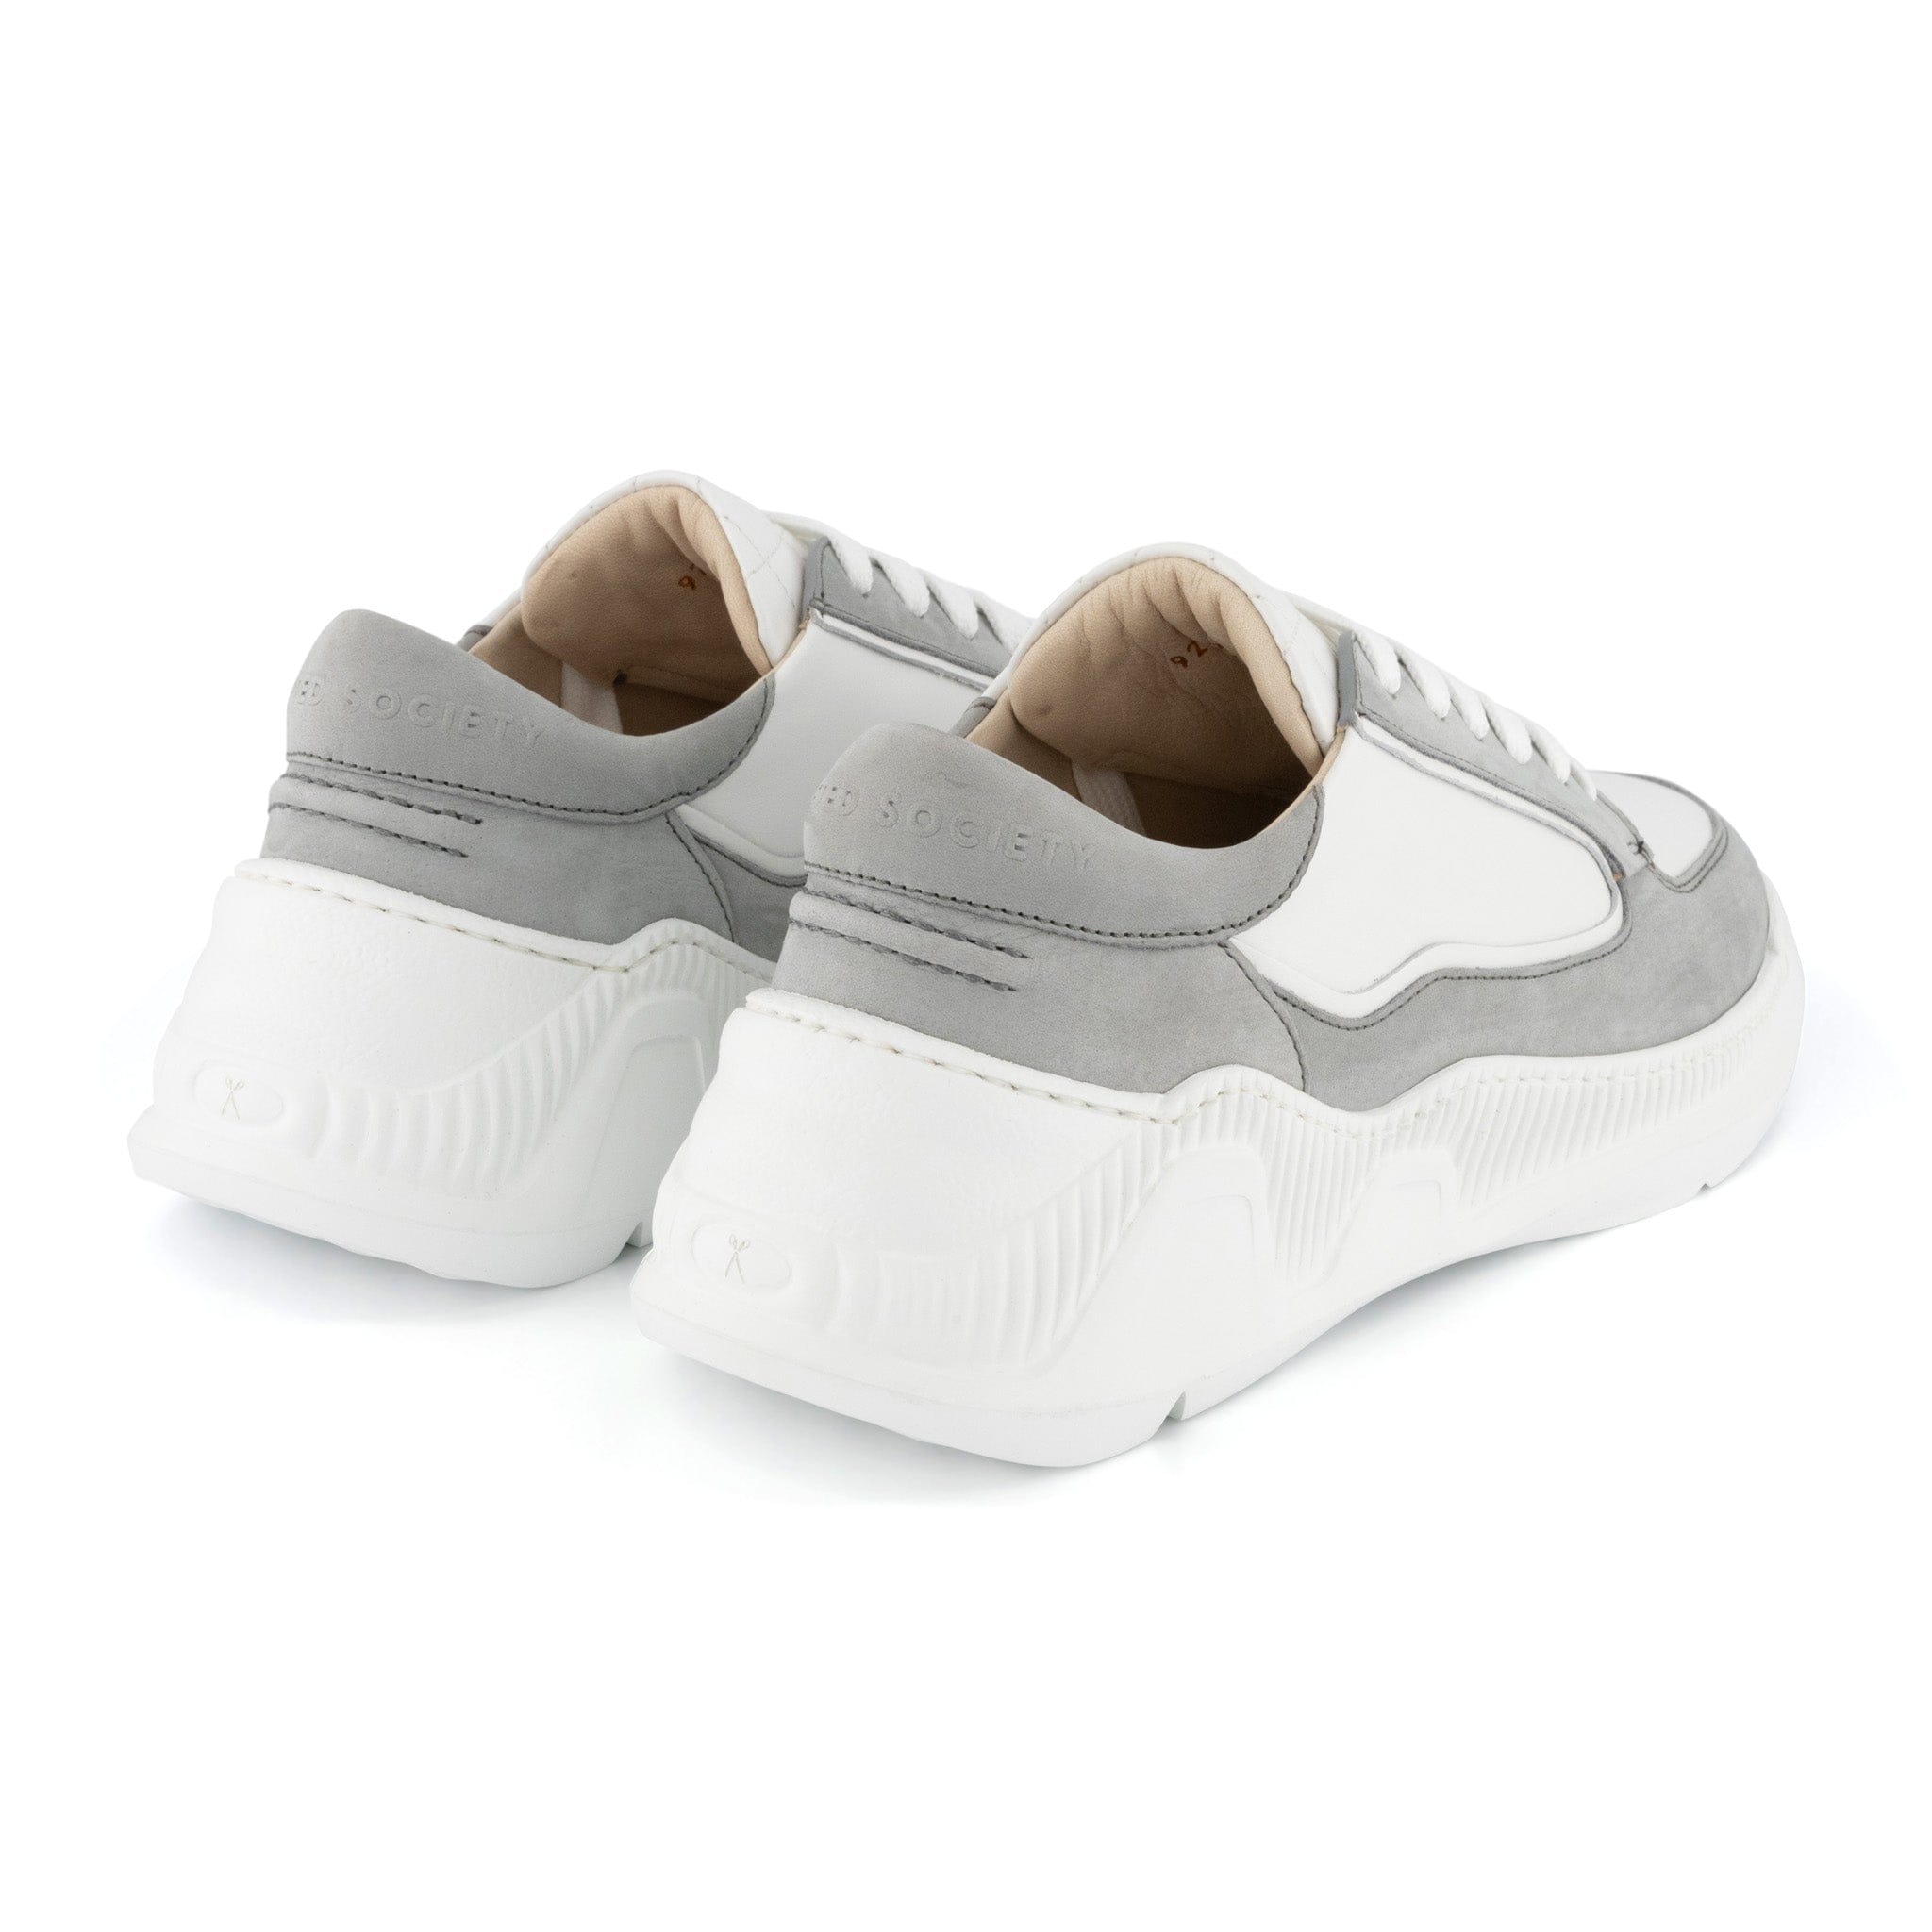 Nesto Low Top Italian Leather Sneaker | Light Grey and White | White Outsole | Made in Italy